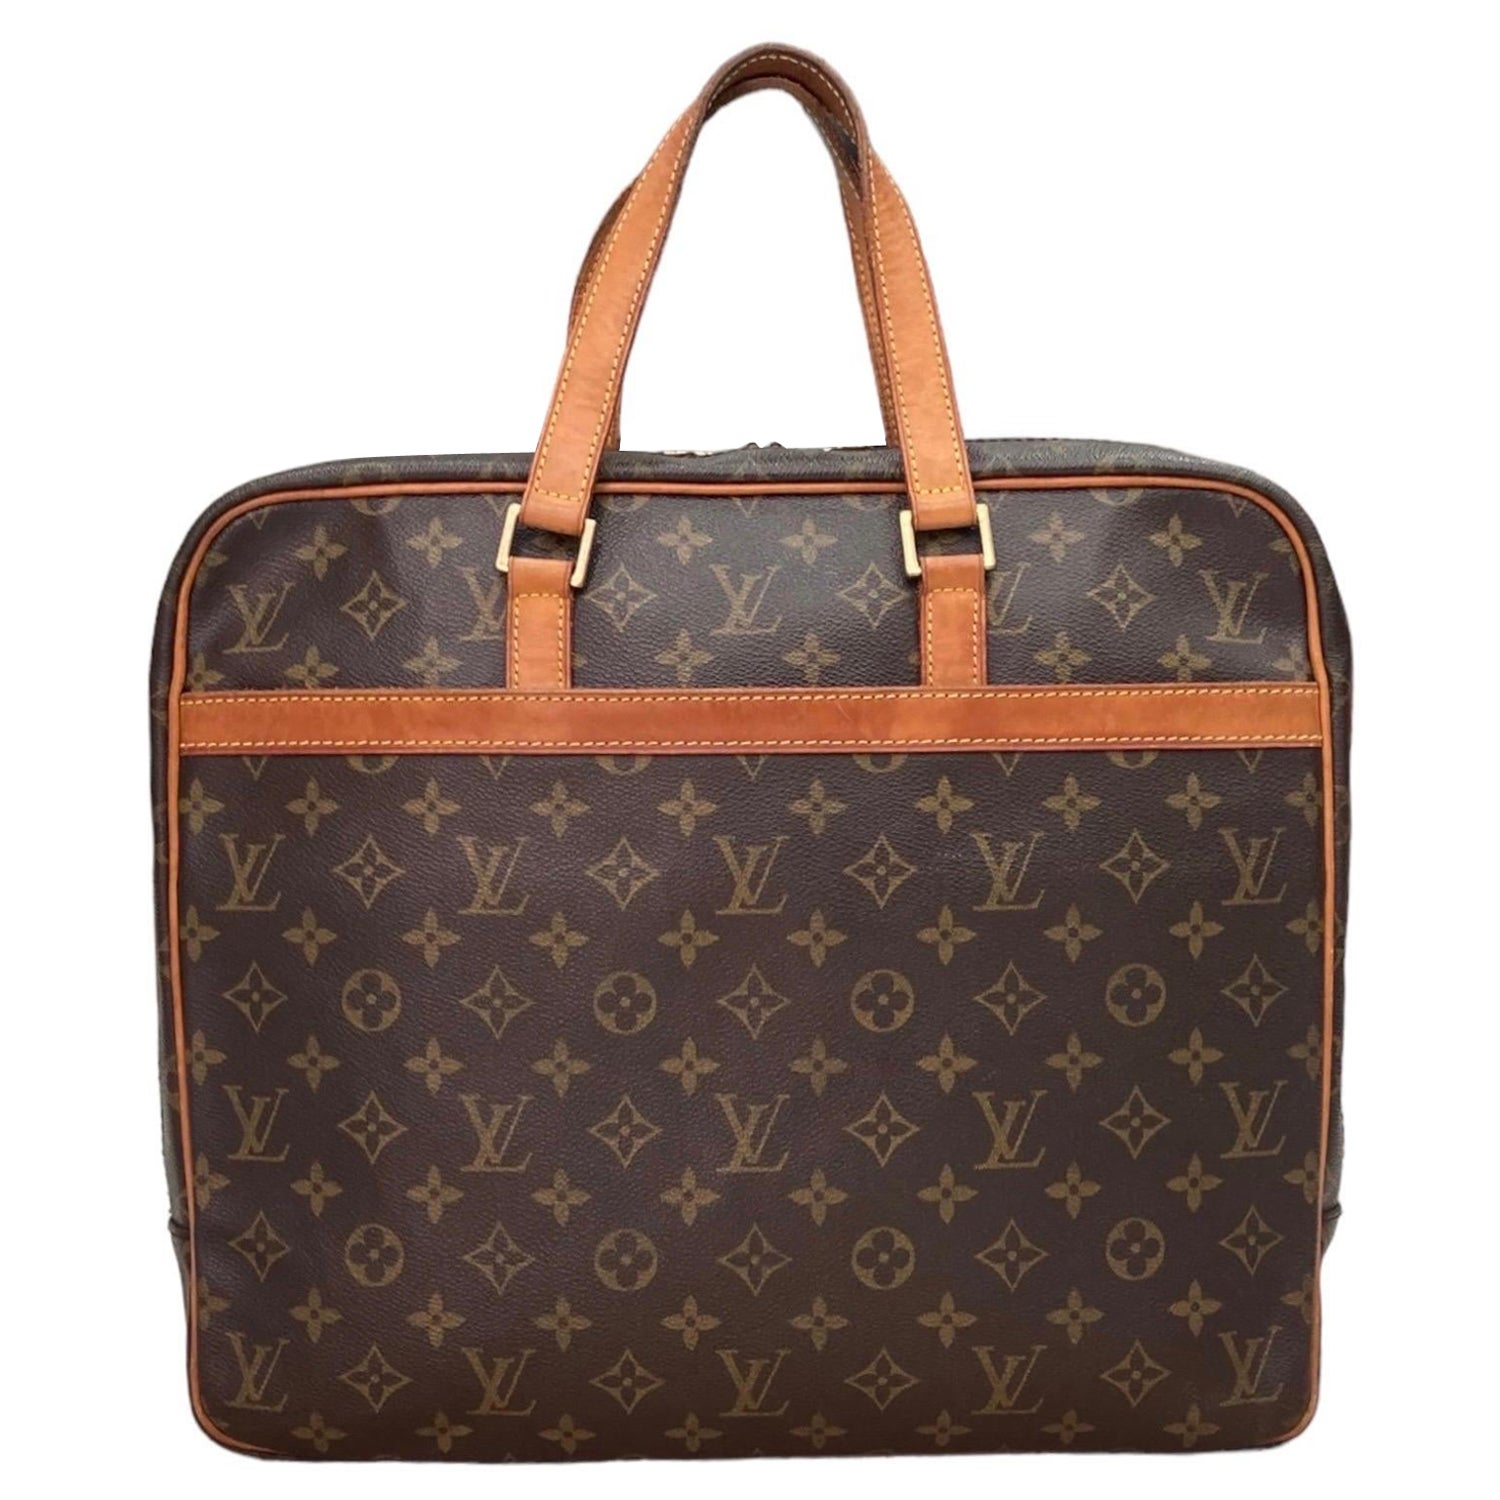 Louis Vuitton MONTSOURIS BACKPACK, Pros/Cons After One Day, DATE CODE or  CHIP